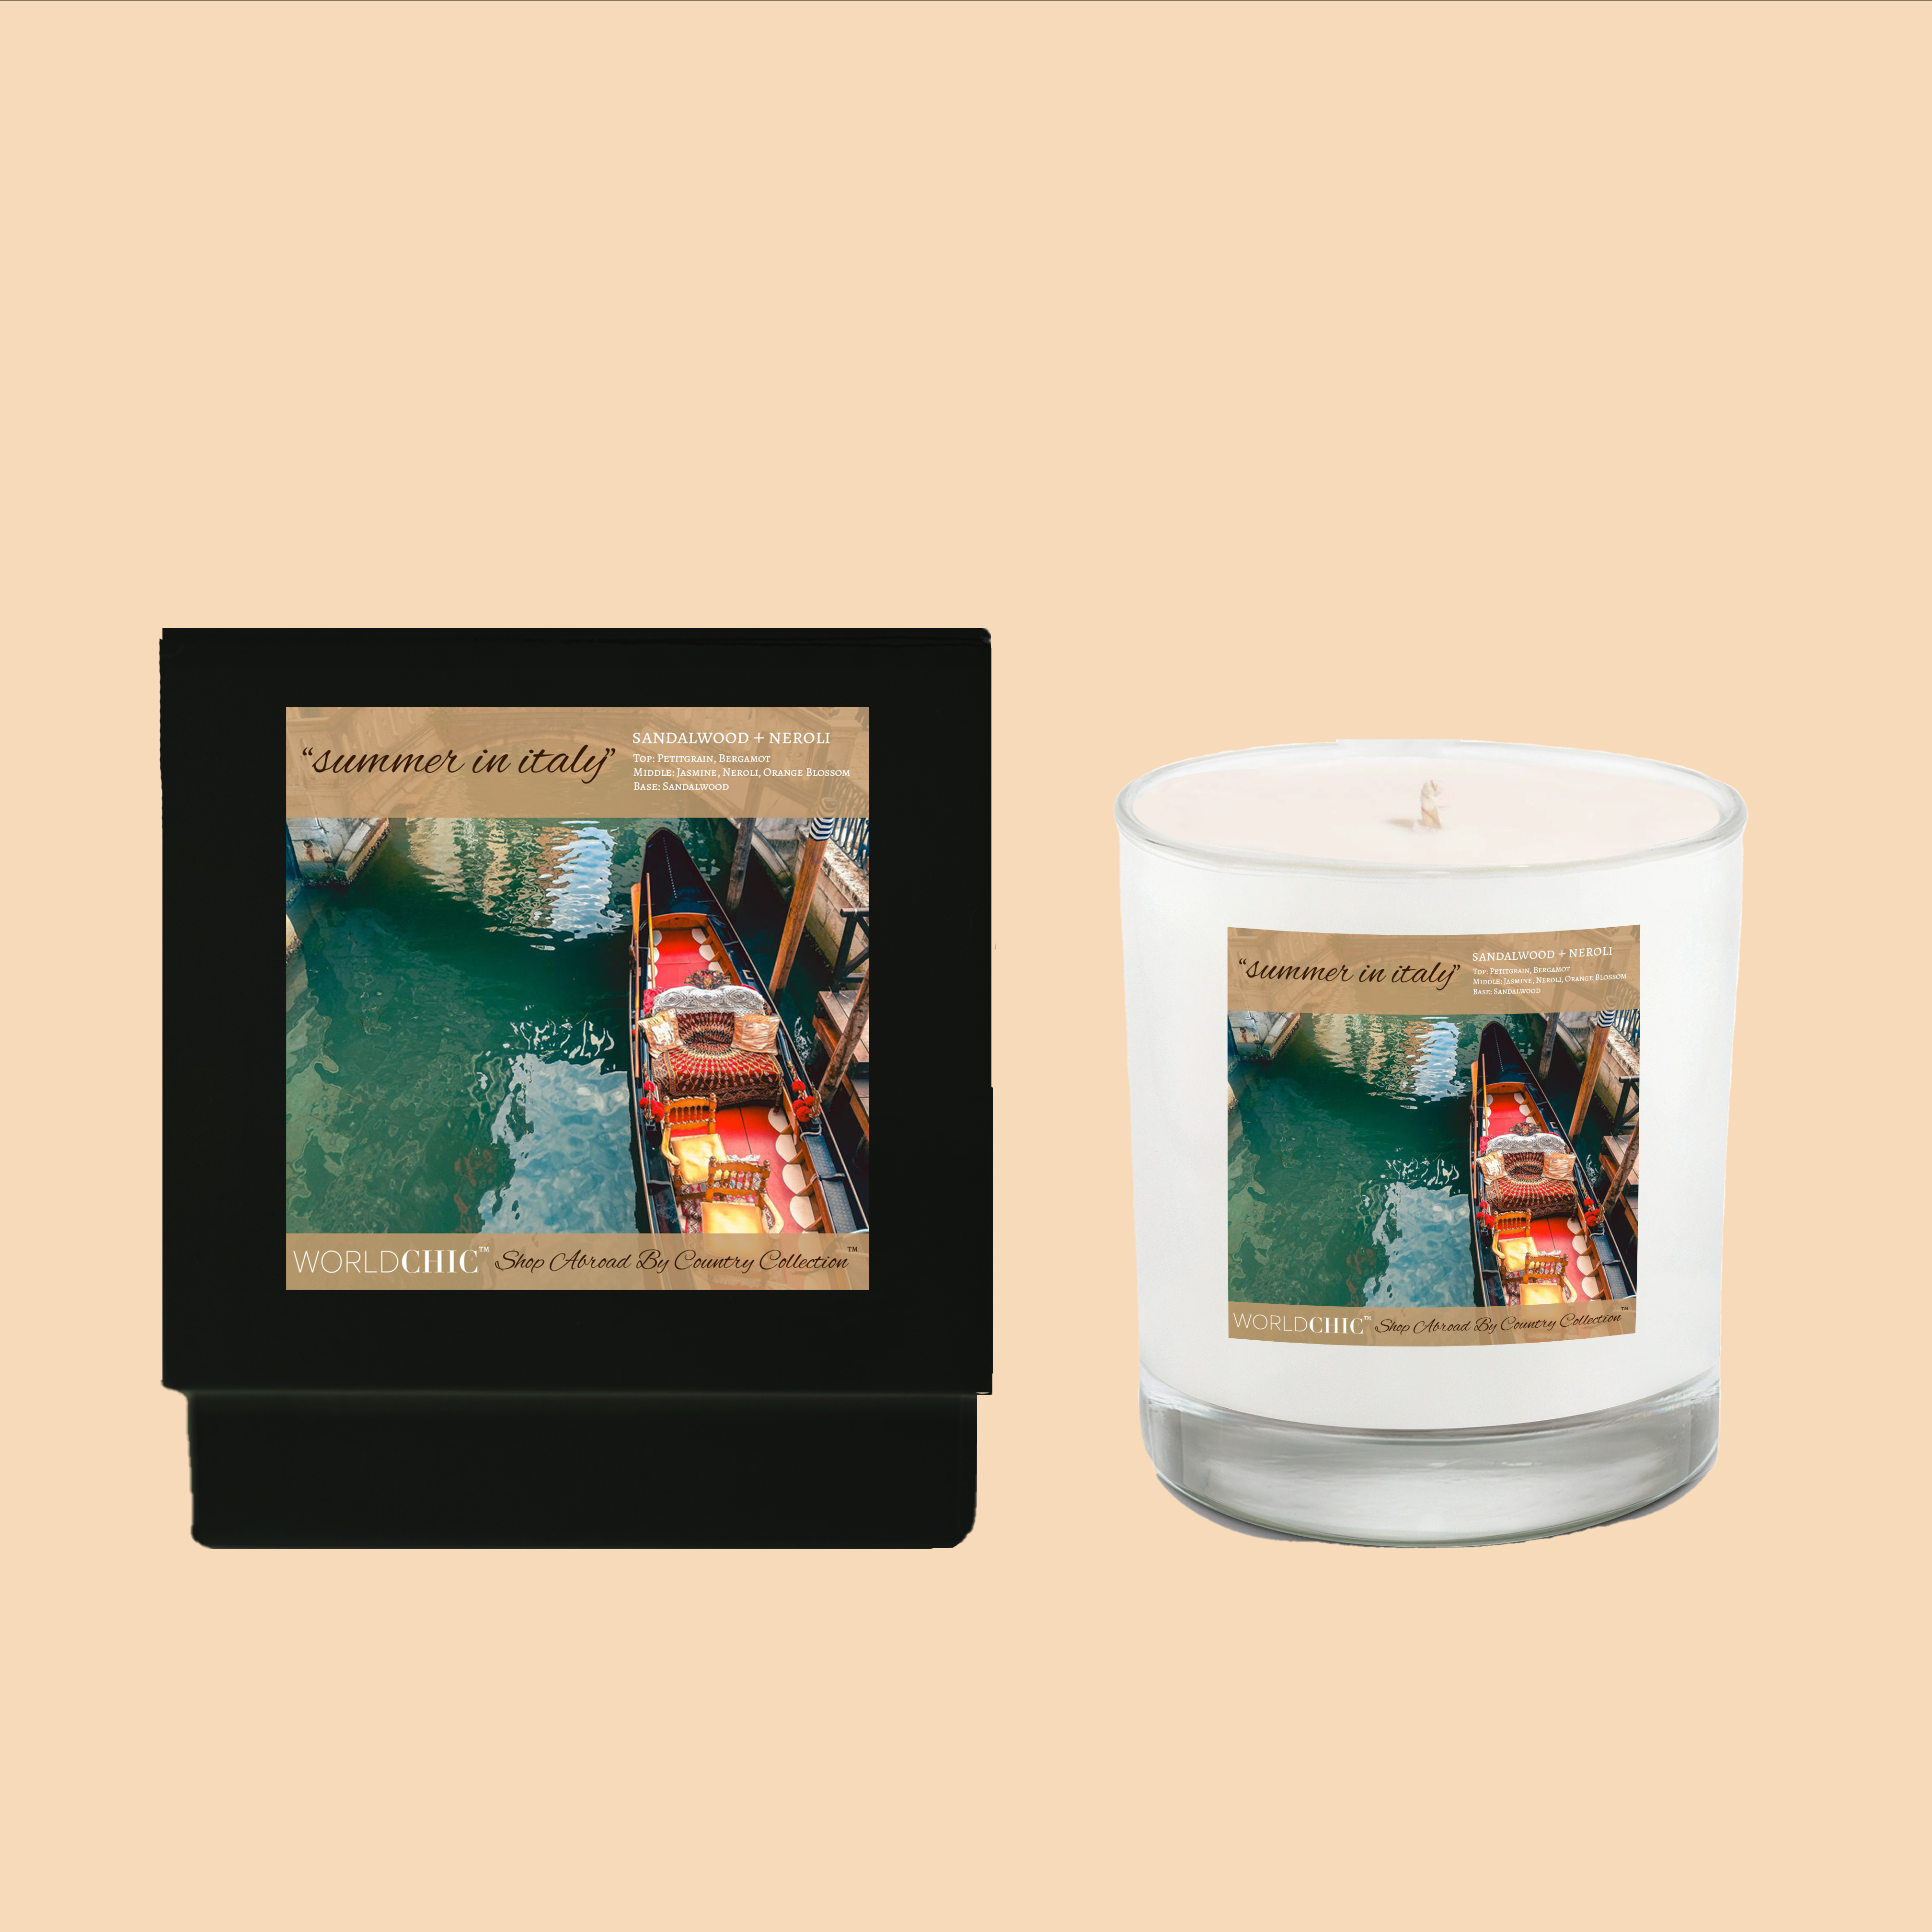 Italy scented candle - "summer in italy" - made by World Chic - Sandalwood and neroli